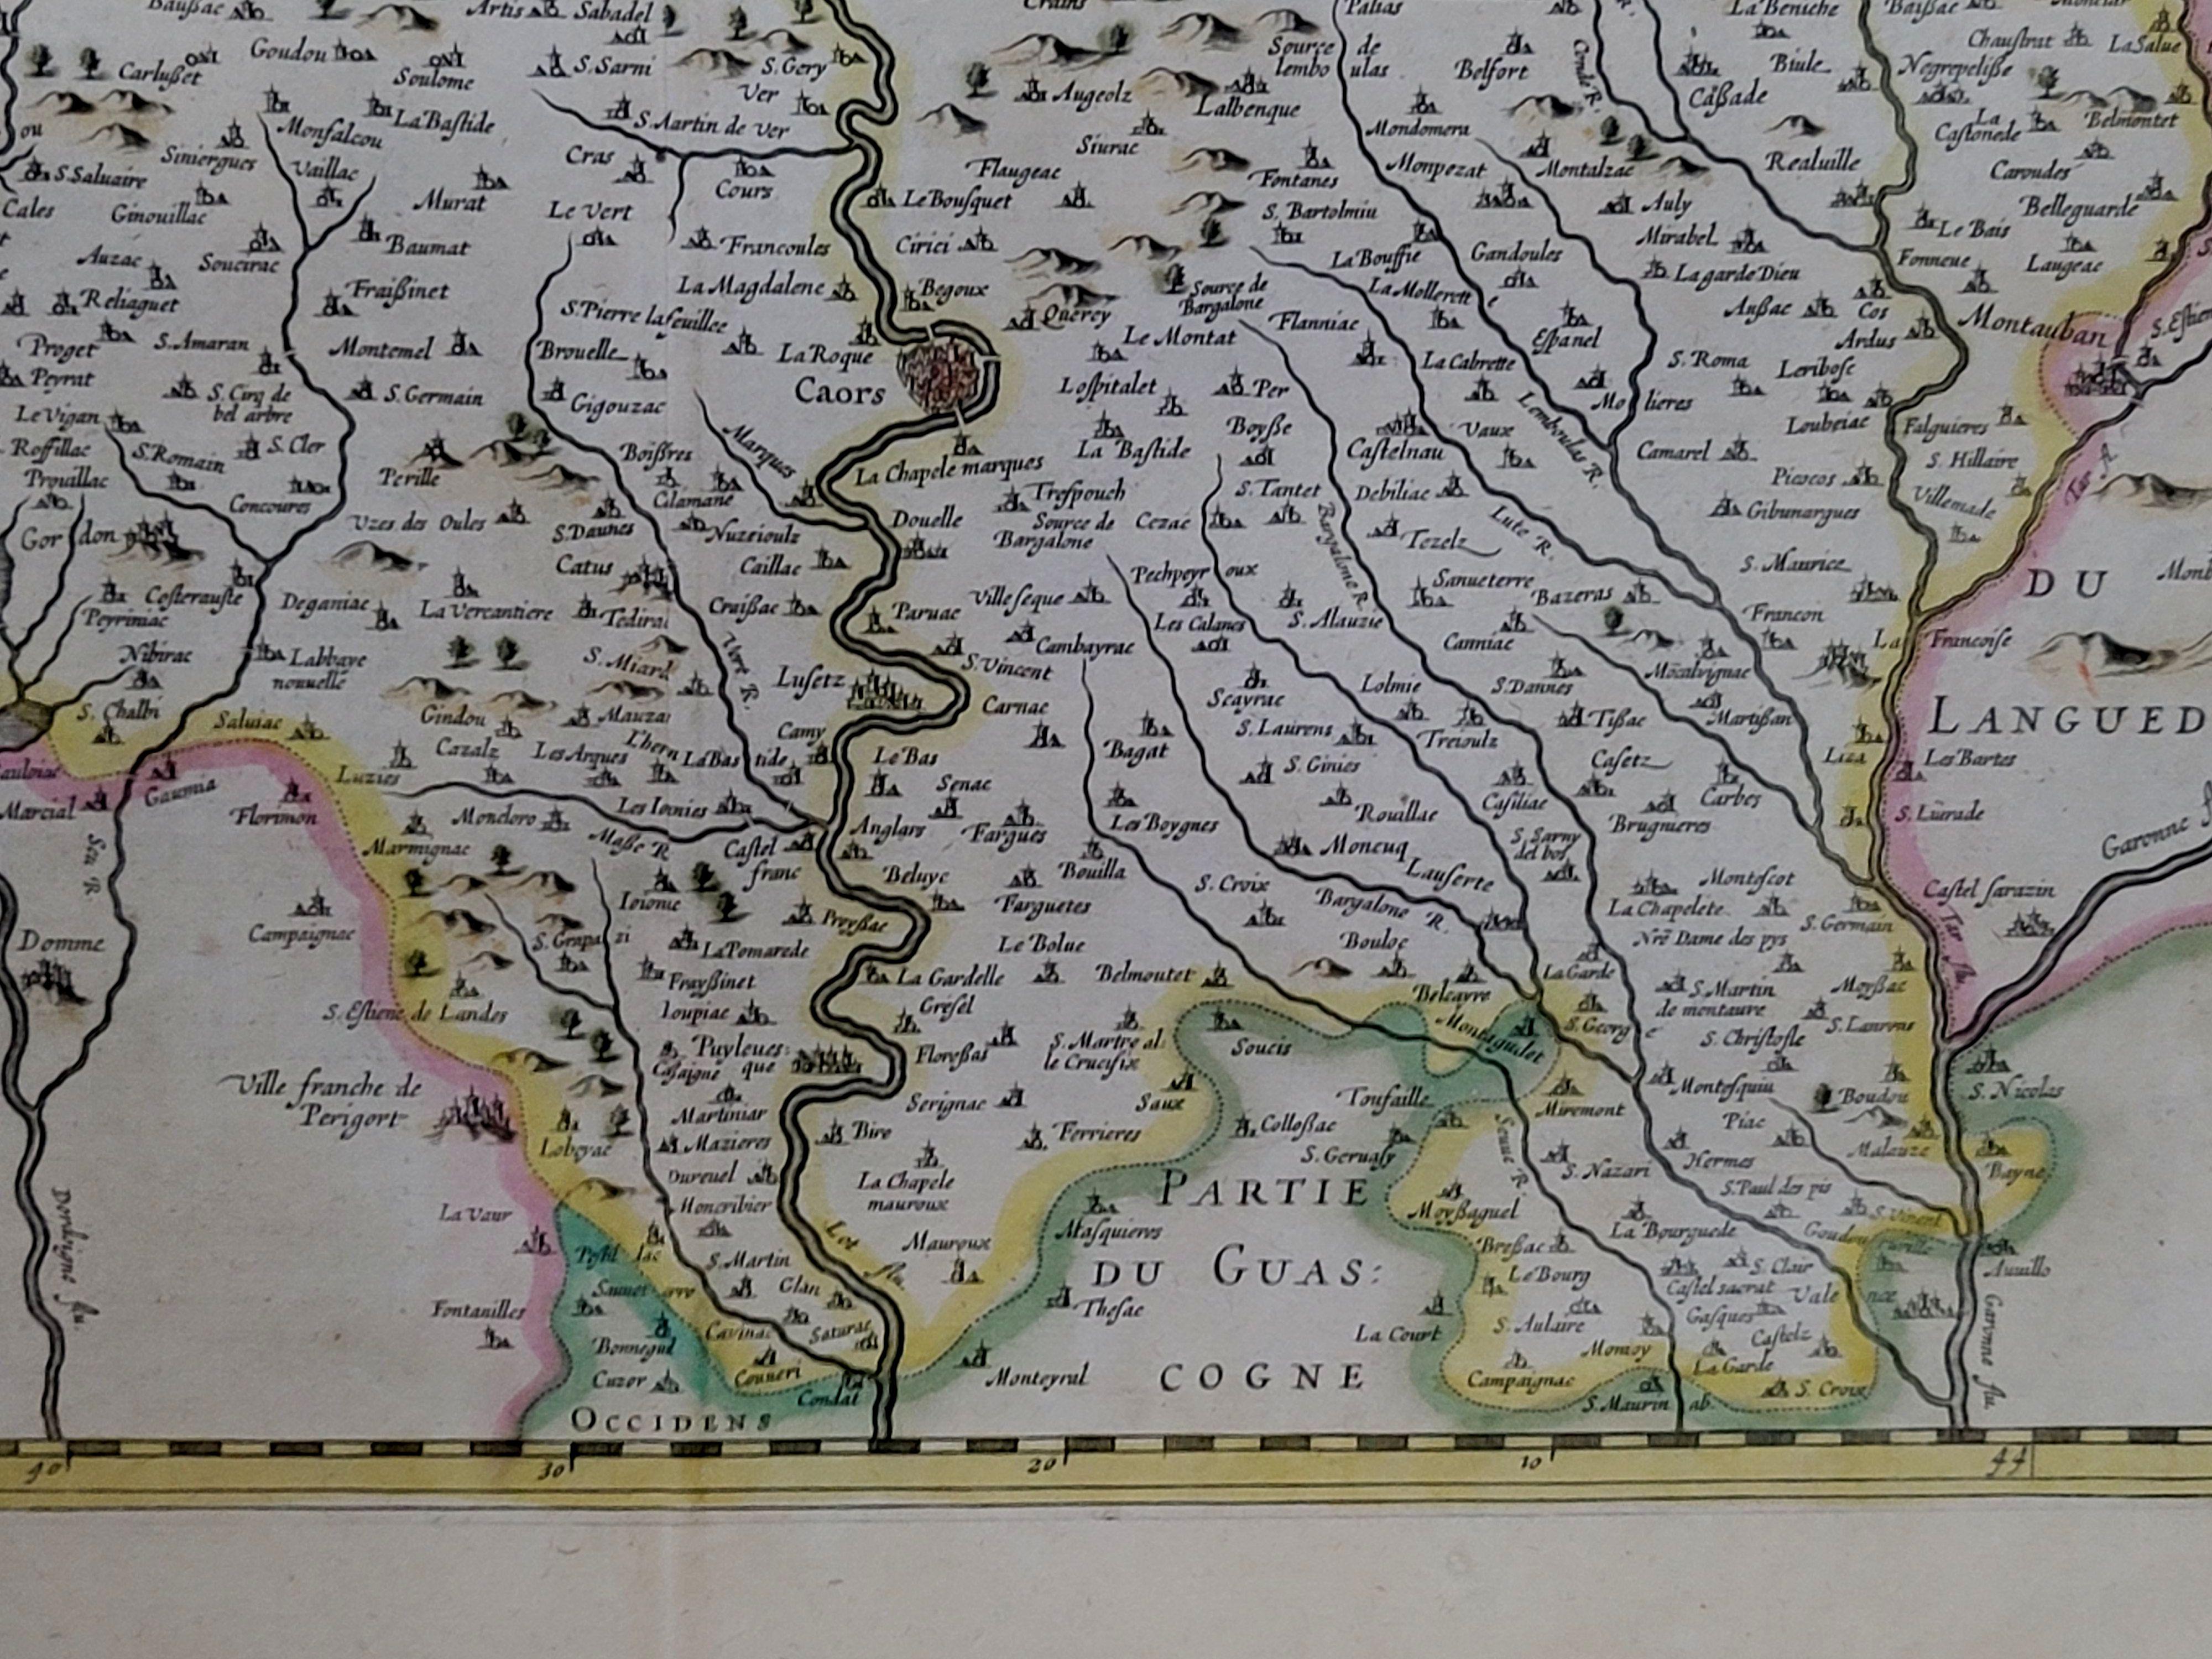 Painted 1625 Mercator Map of the Provenience of Quercy, 